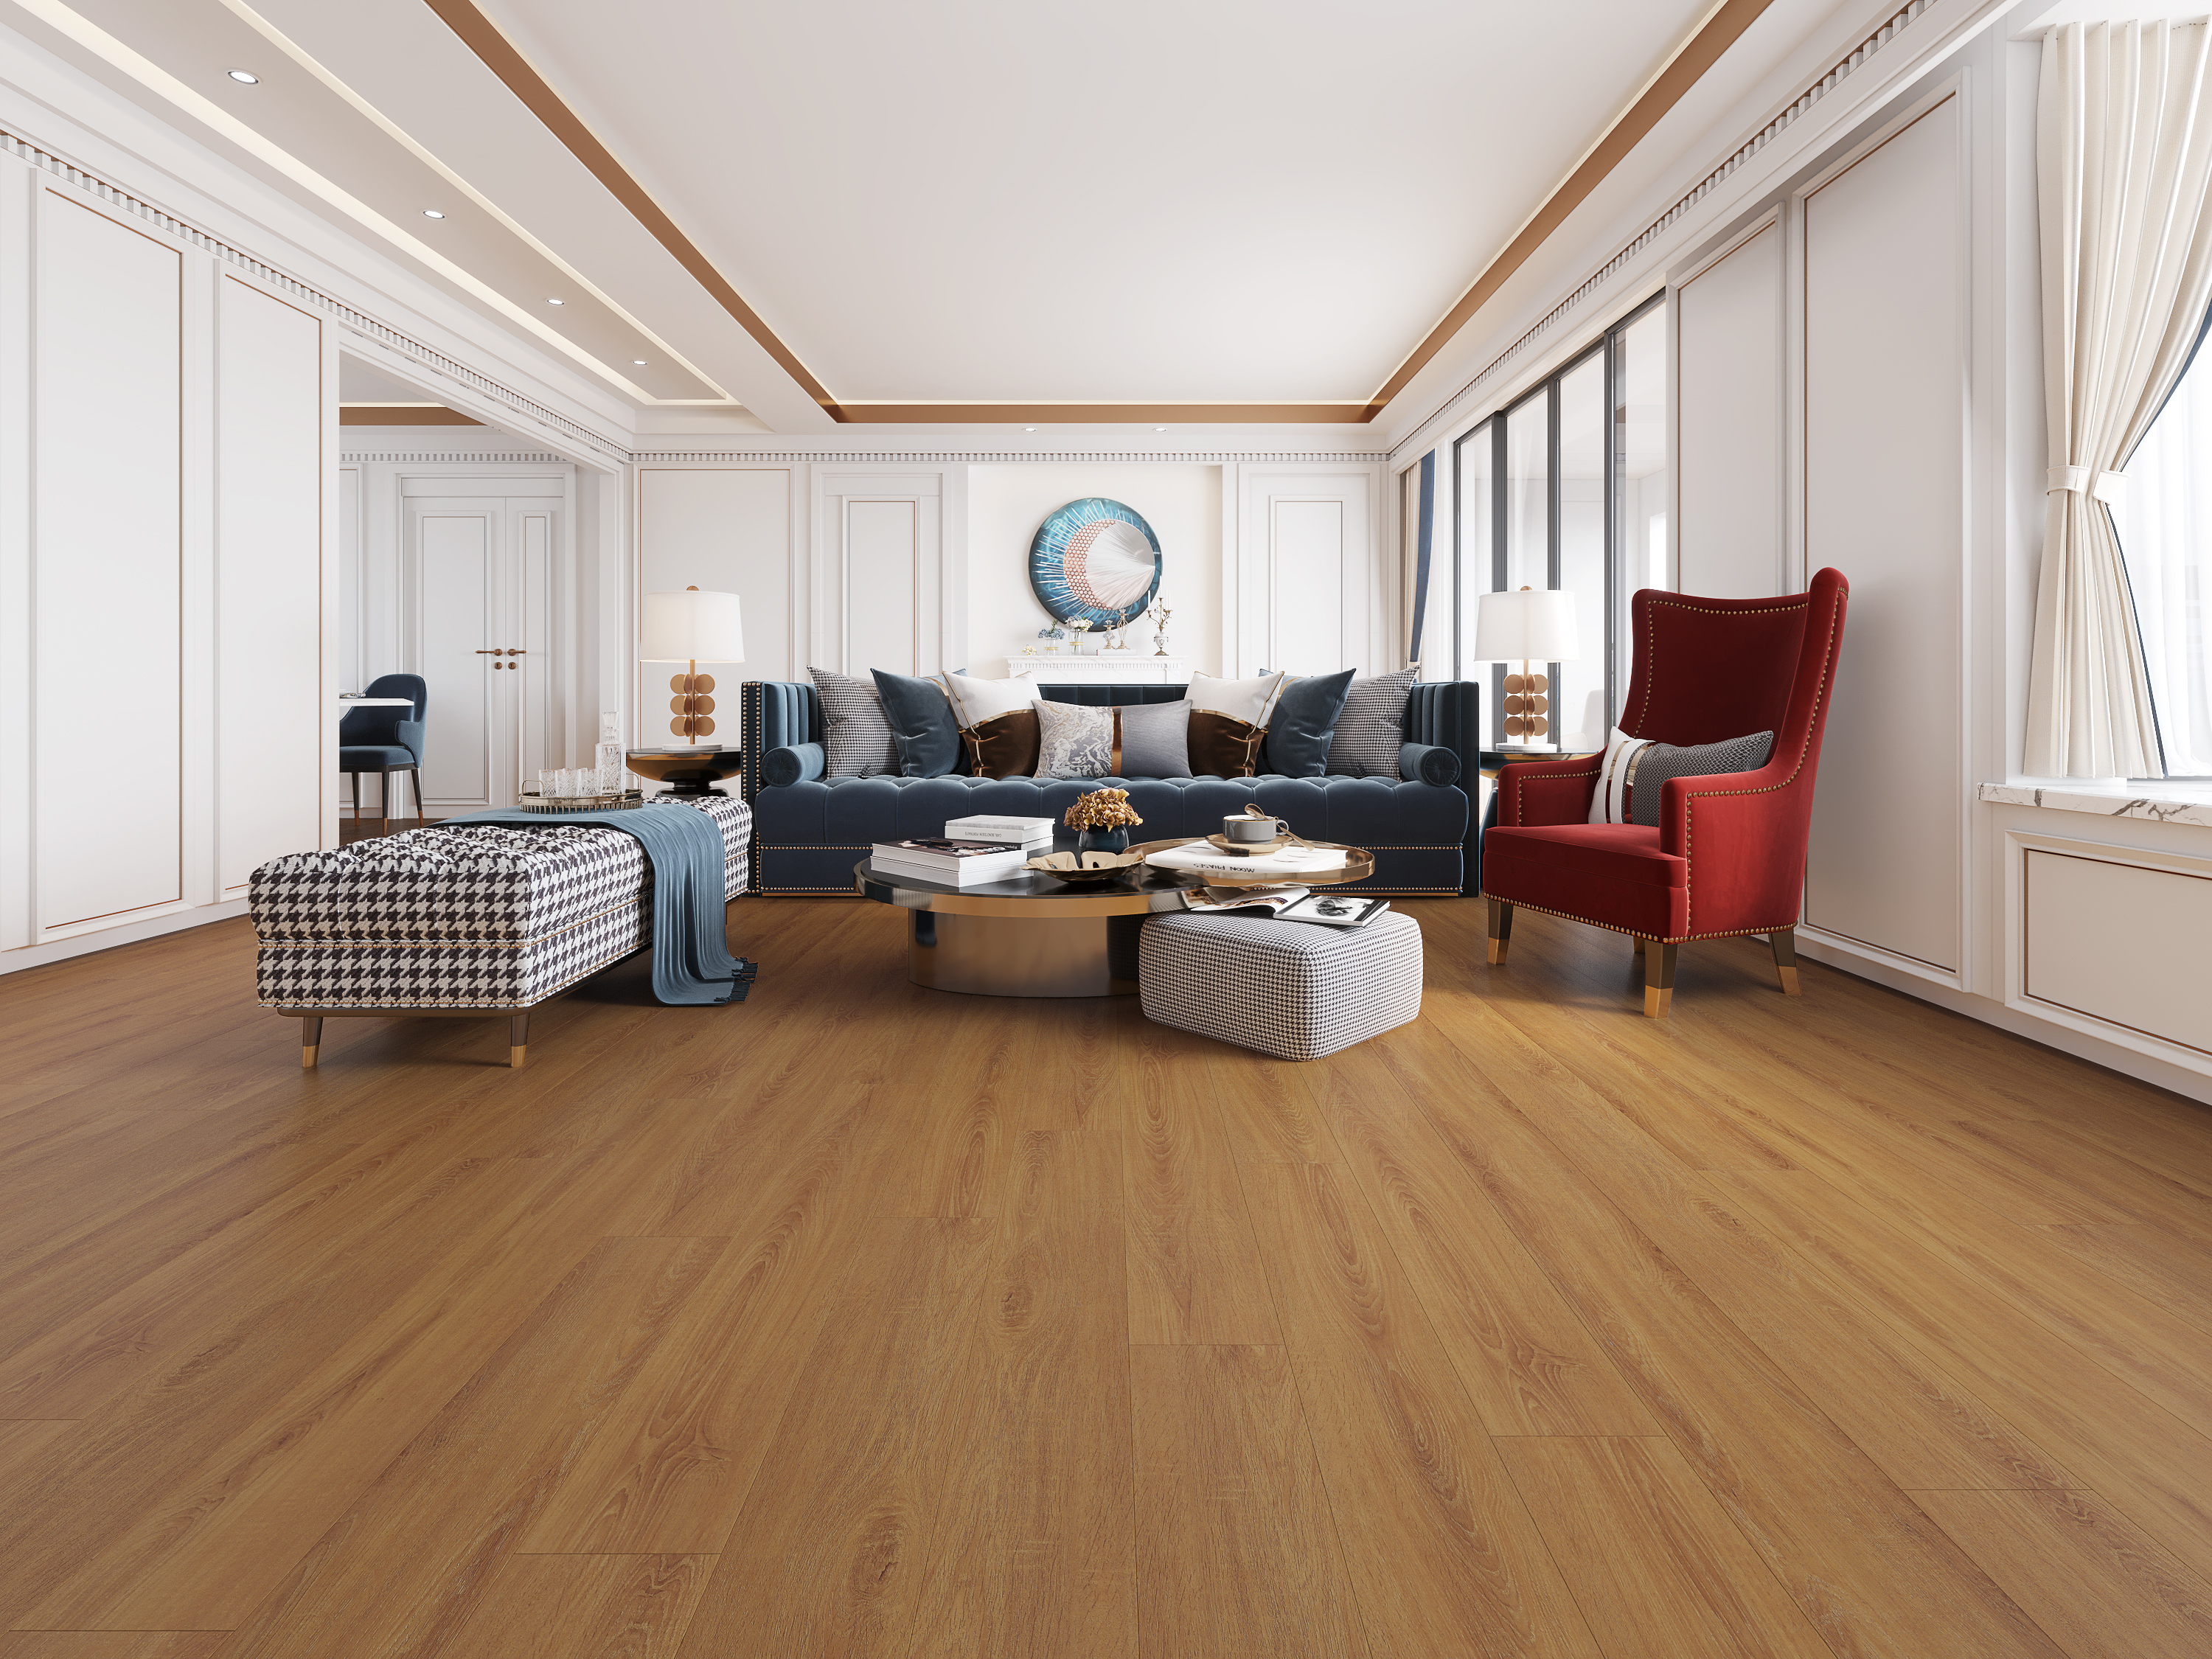 What are the advantages and disadvantages of spc flooring? How to maintain spc flooring?